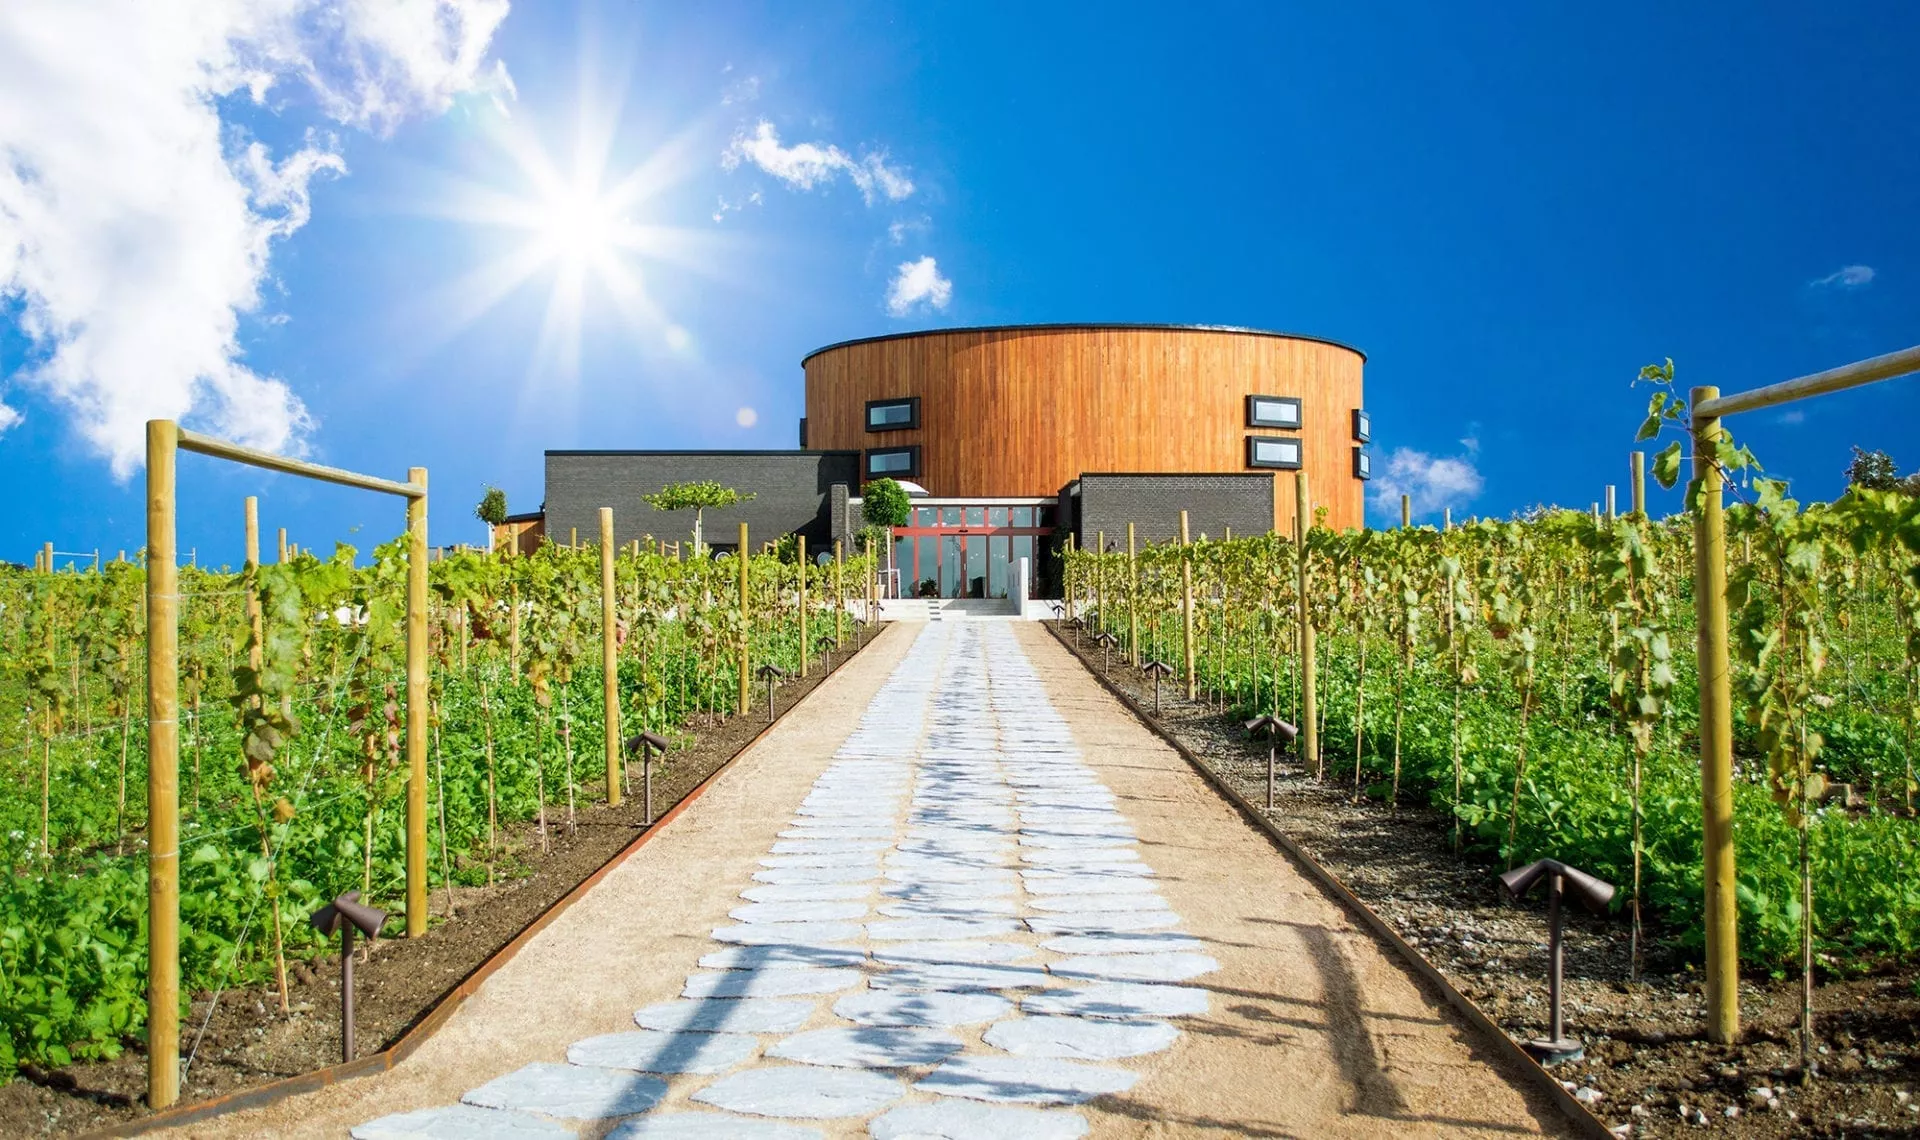 Nordic Sea Winery in Sweden, Europe | Wineries - Rated 0.8